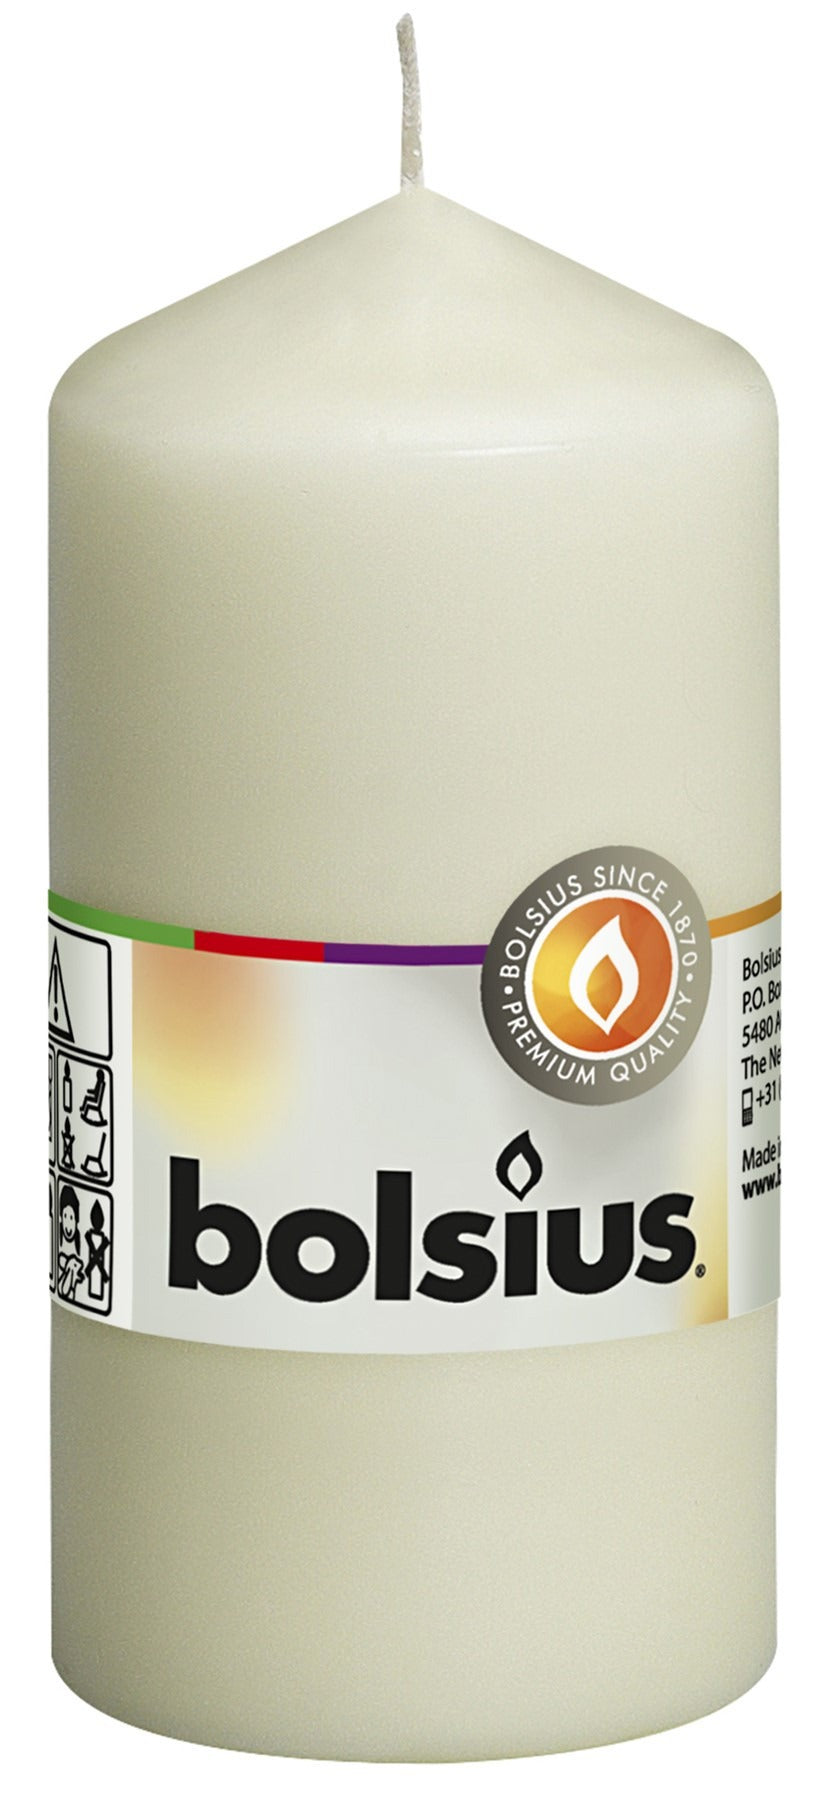 View Bolsius Ivory Pillar Candle 12060mm information